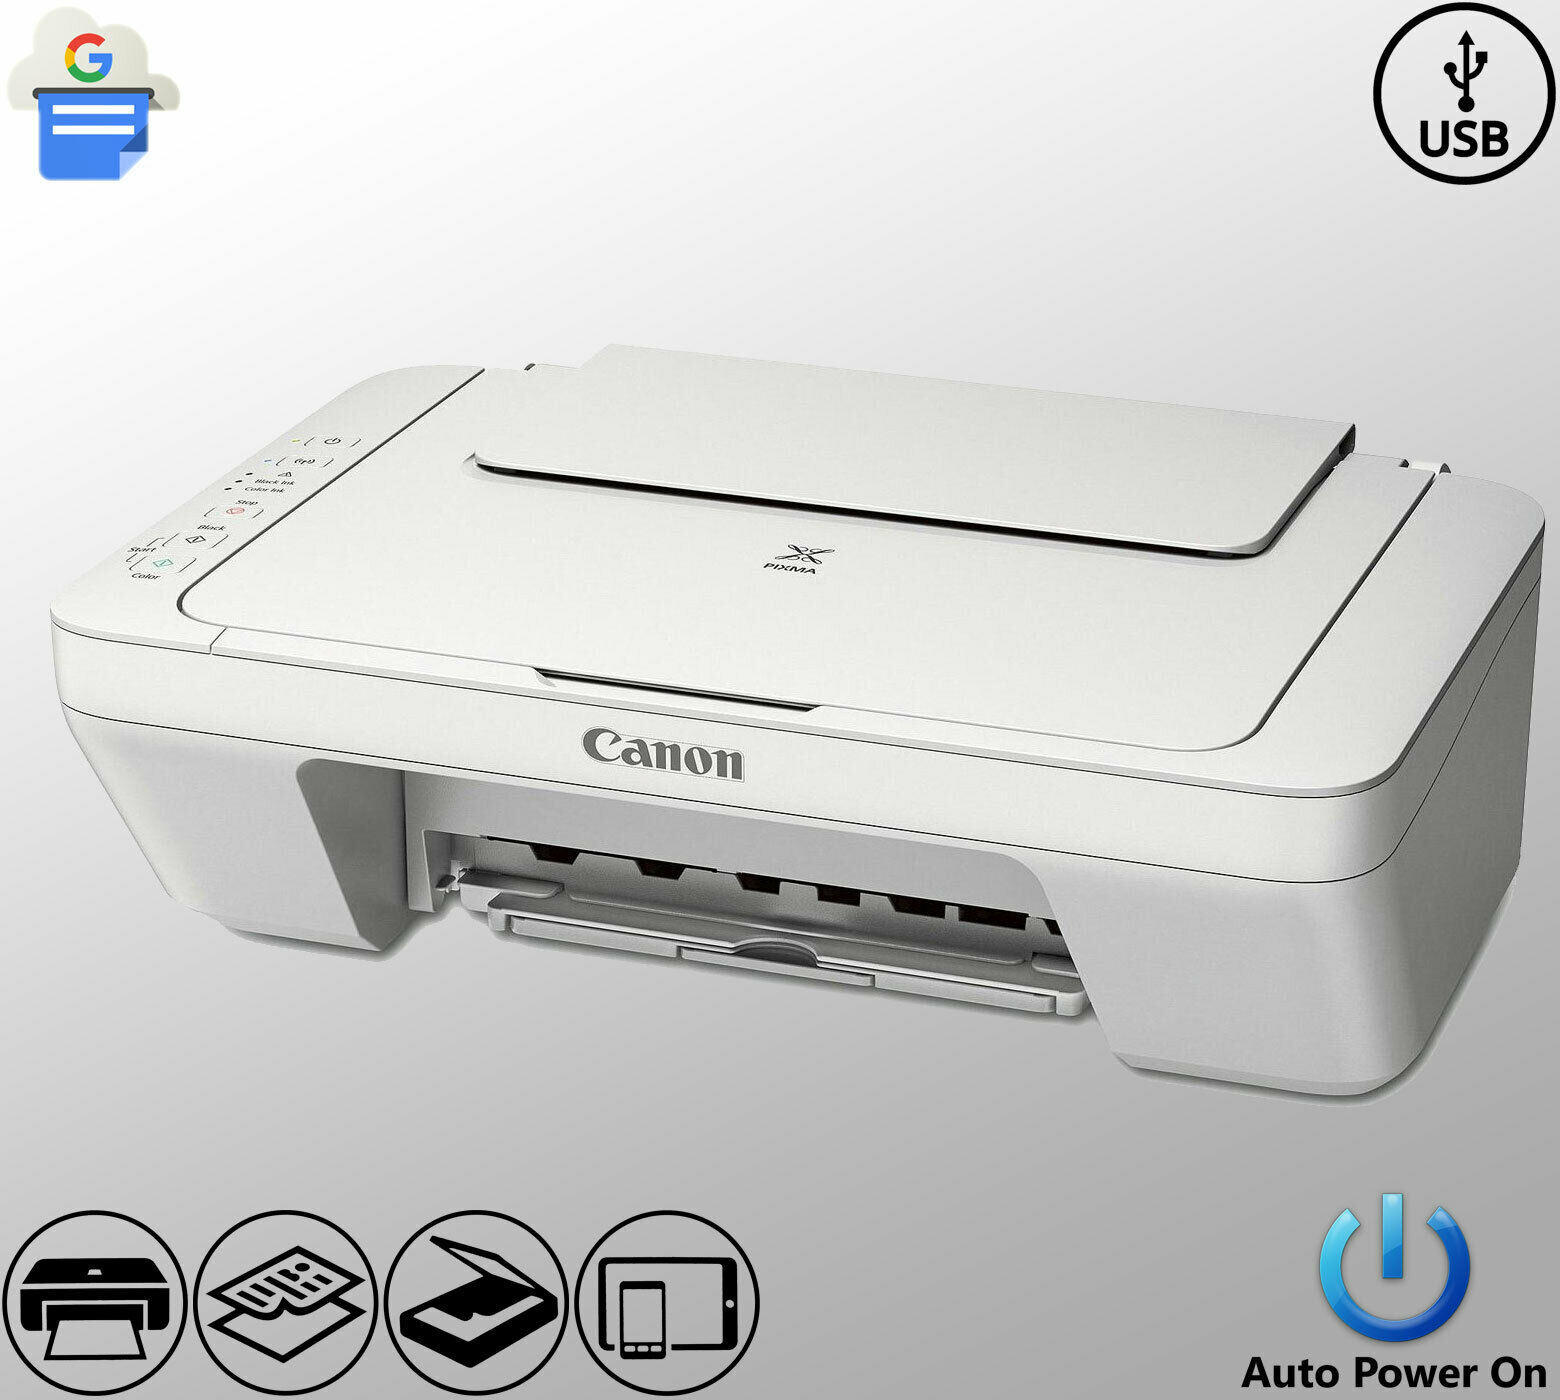 Canon Color Printer All-in-One Copier Scanner Home Office USB (ink not included)